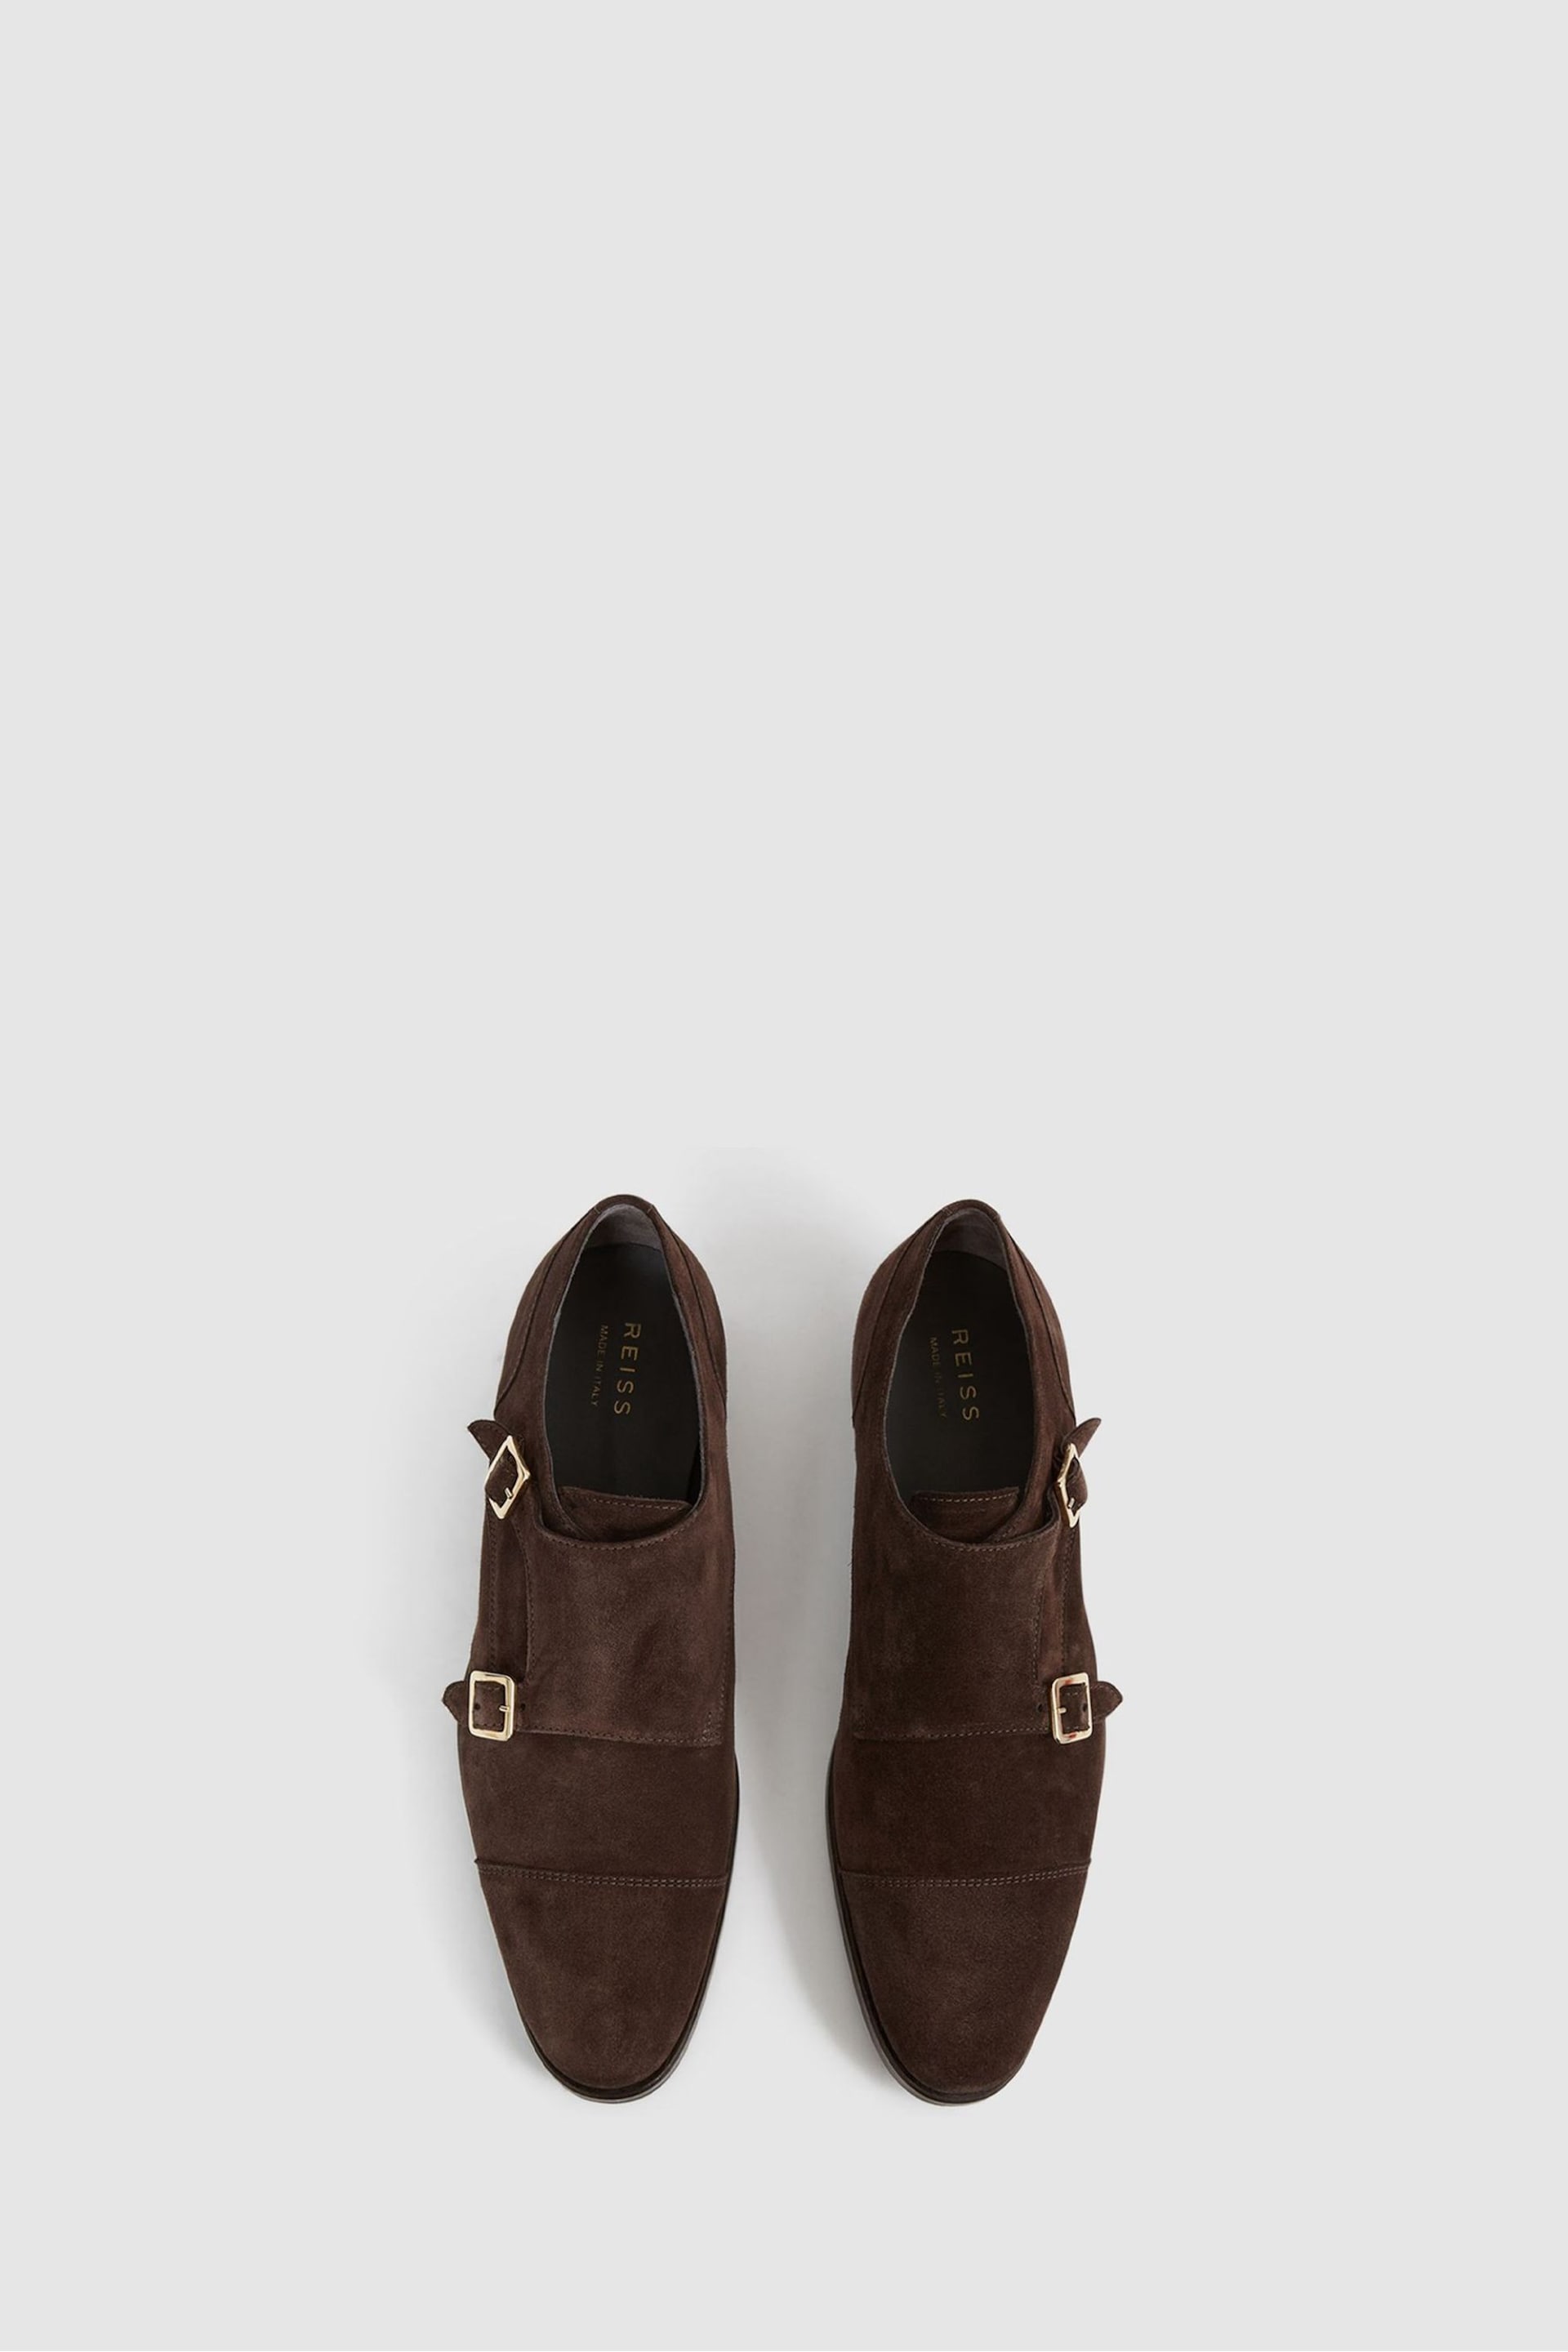 Reiss Chocolate Rivington Leather Monk Strap Shoes - Image 4 of 7